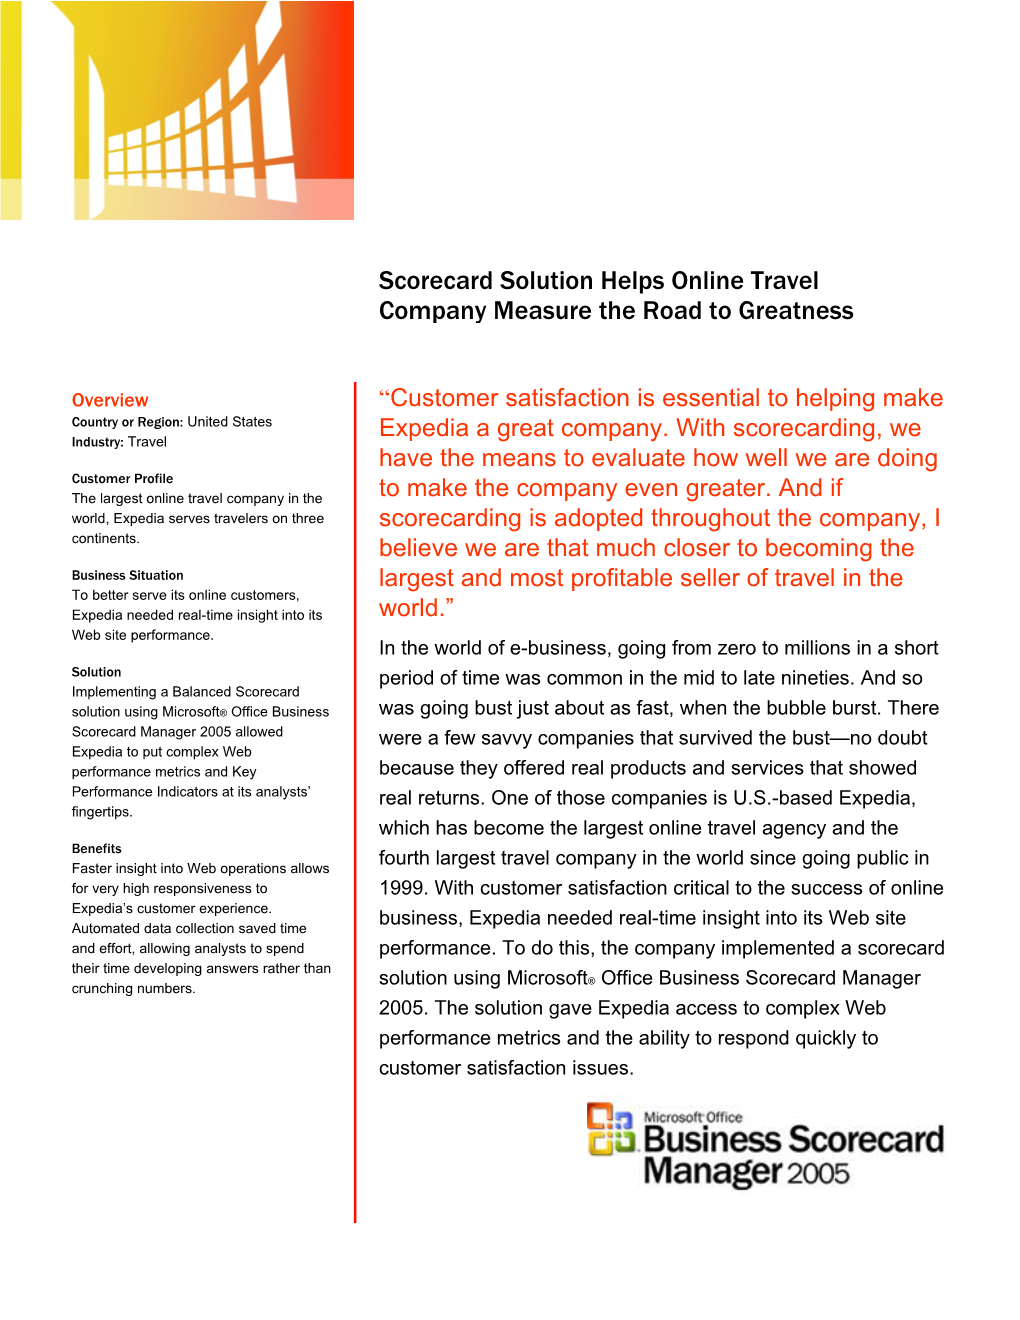 Scorecard Solution Helps Online Travel Company Measure the Road to Greatness